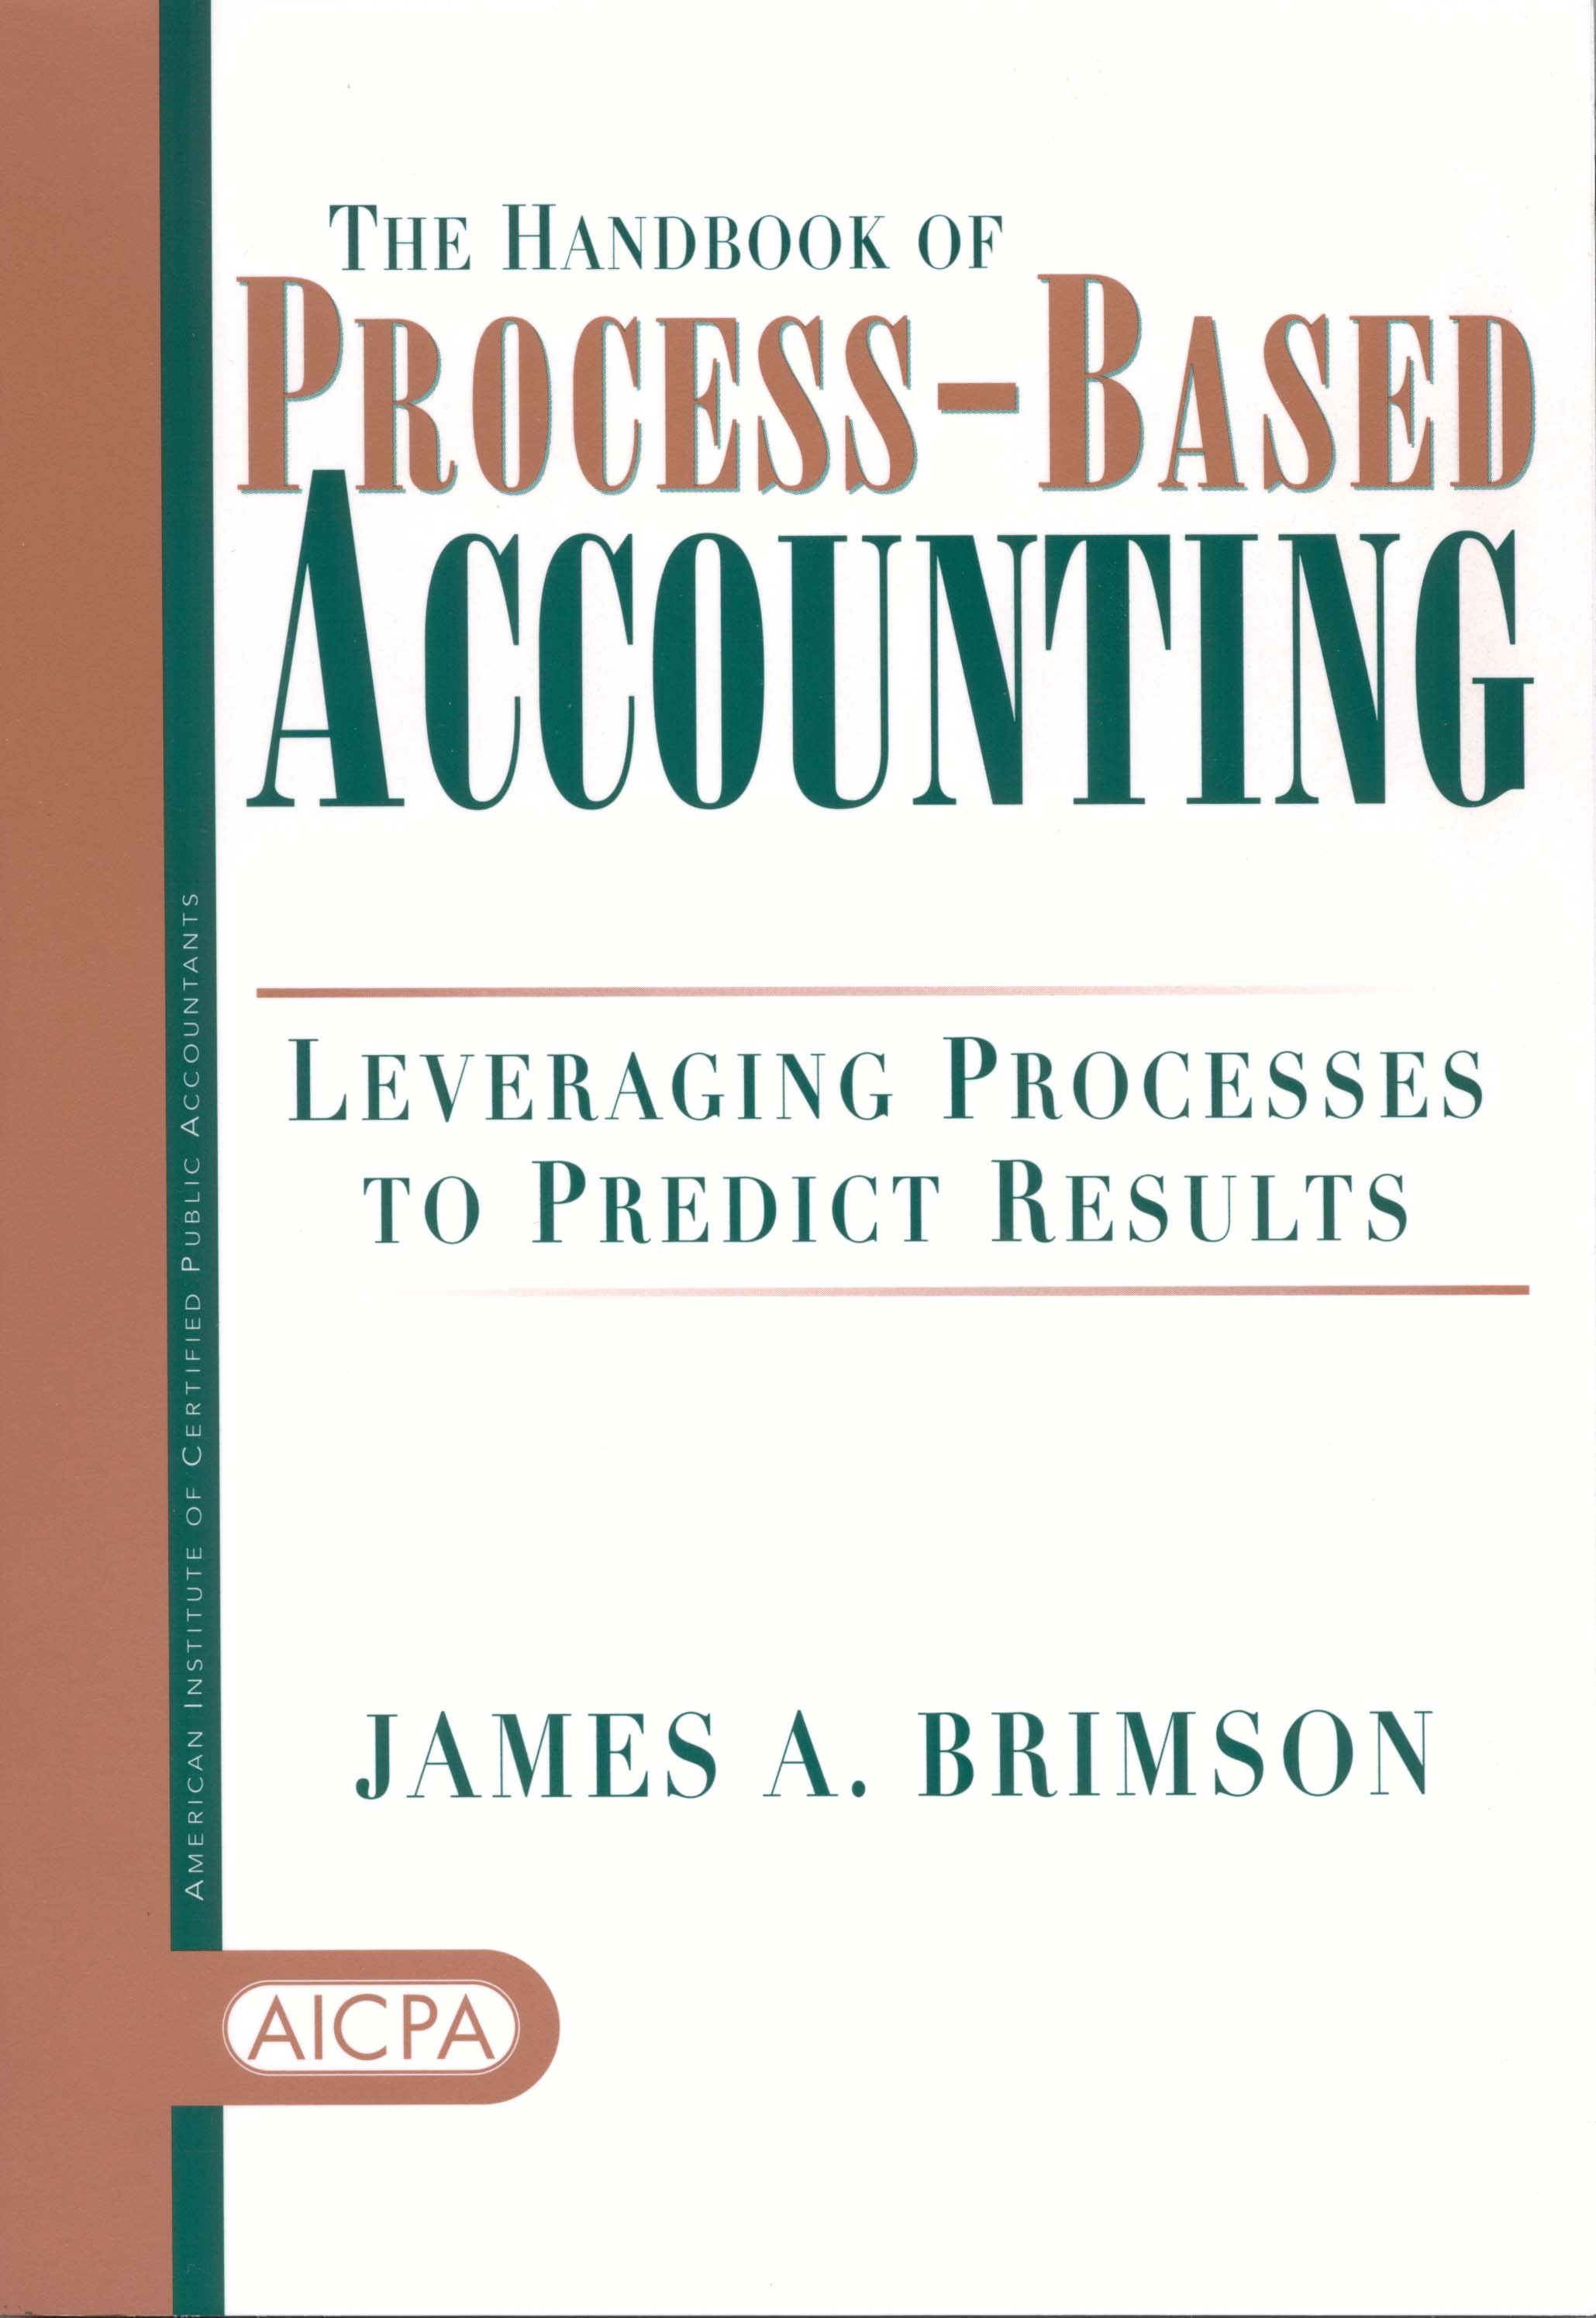 The handbook of process-based accounting: Leveraging processes to predict results James A. Brimson